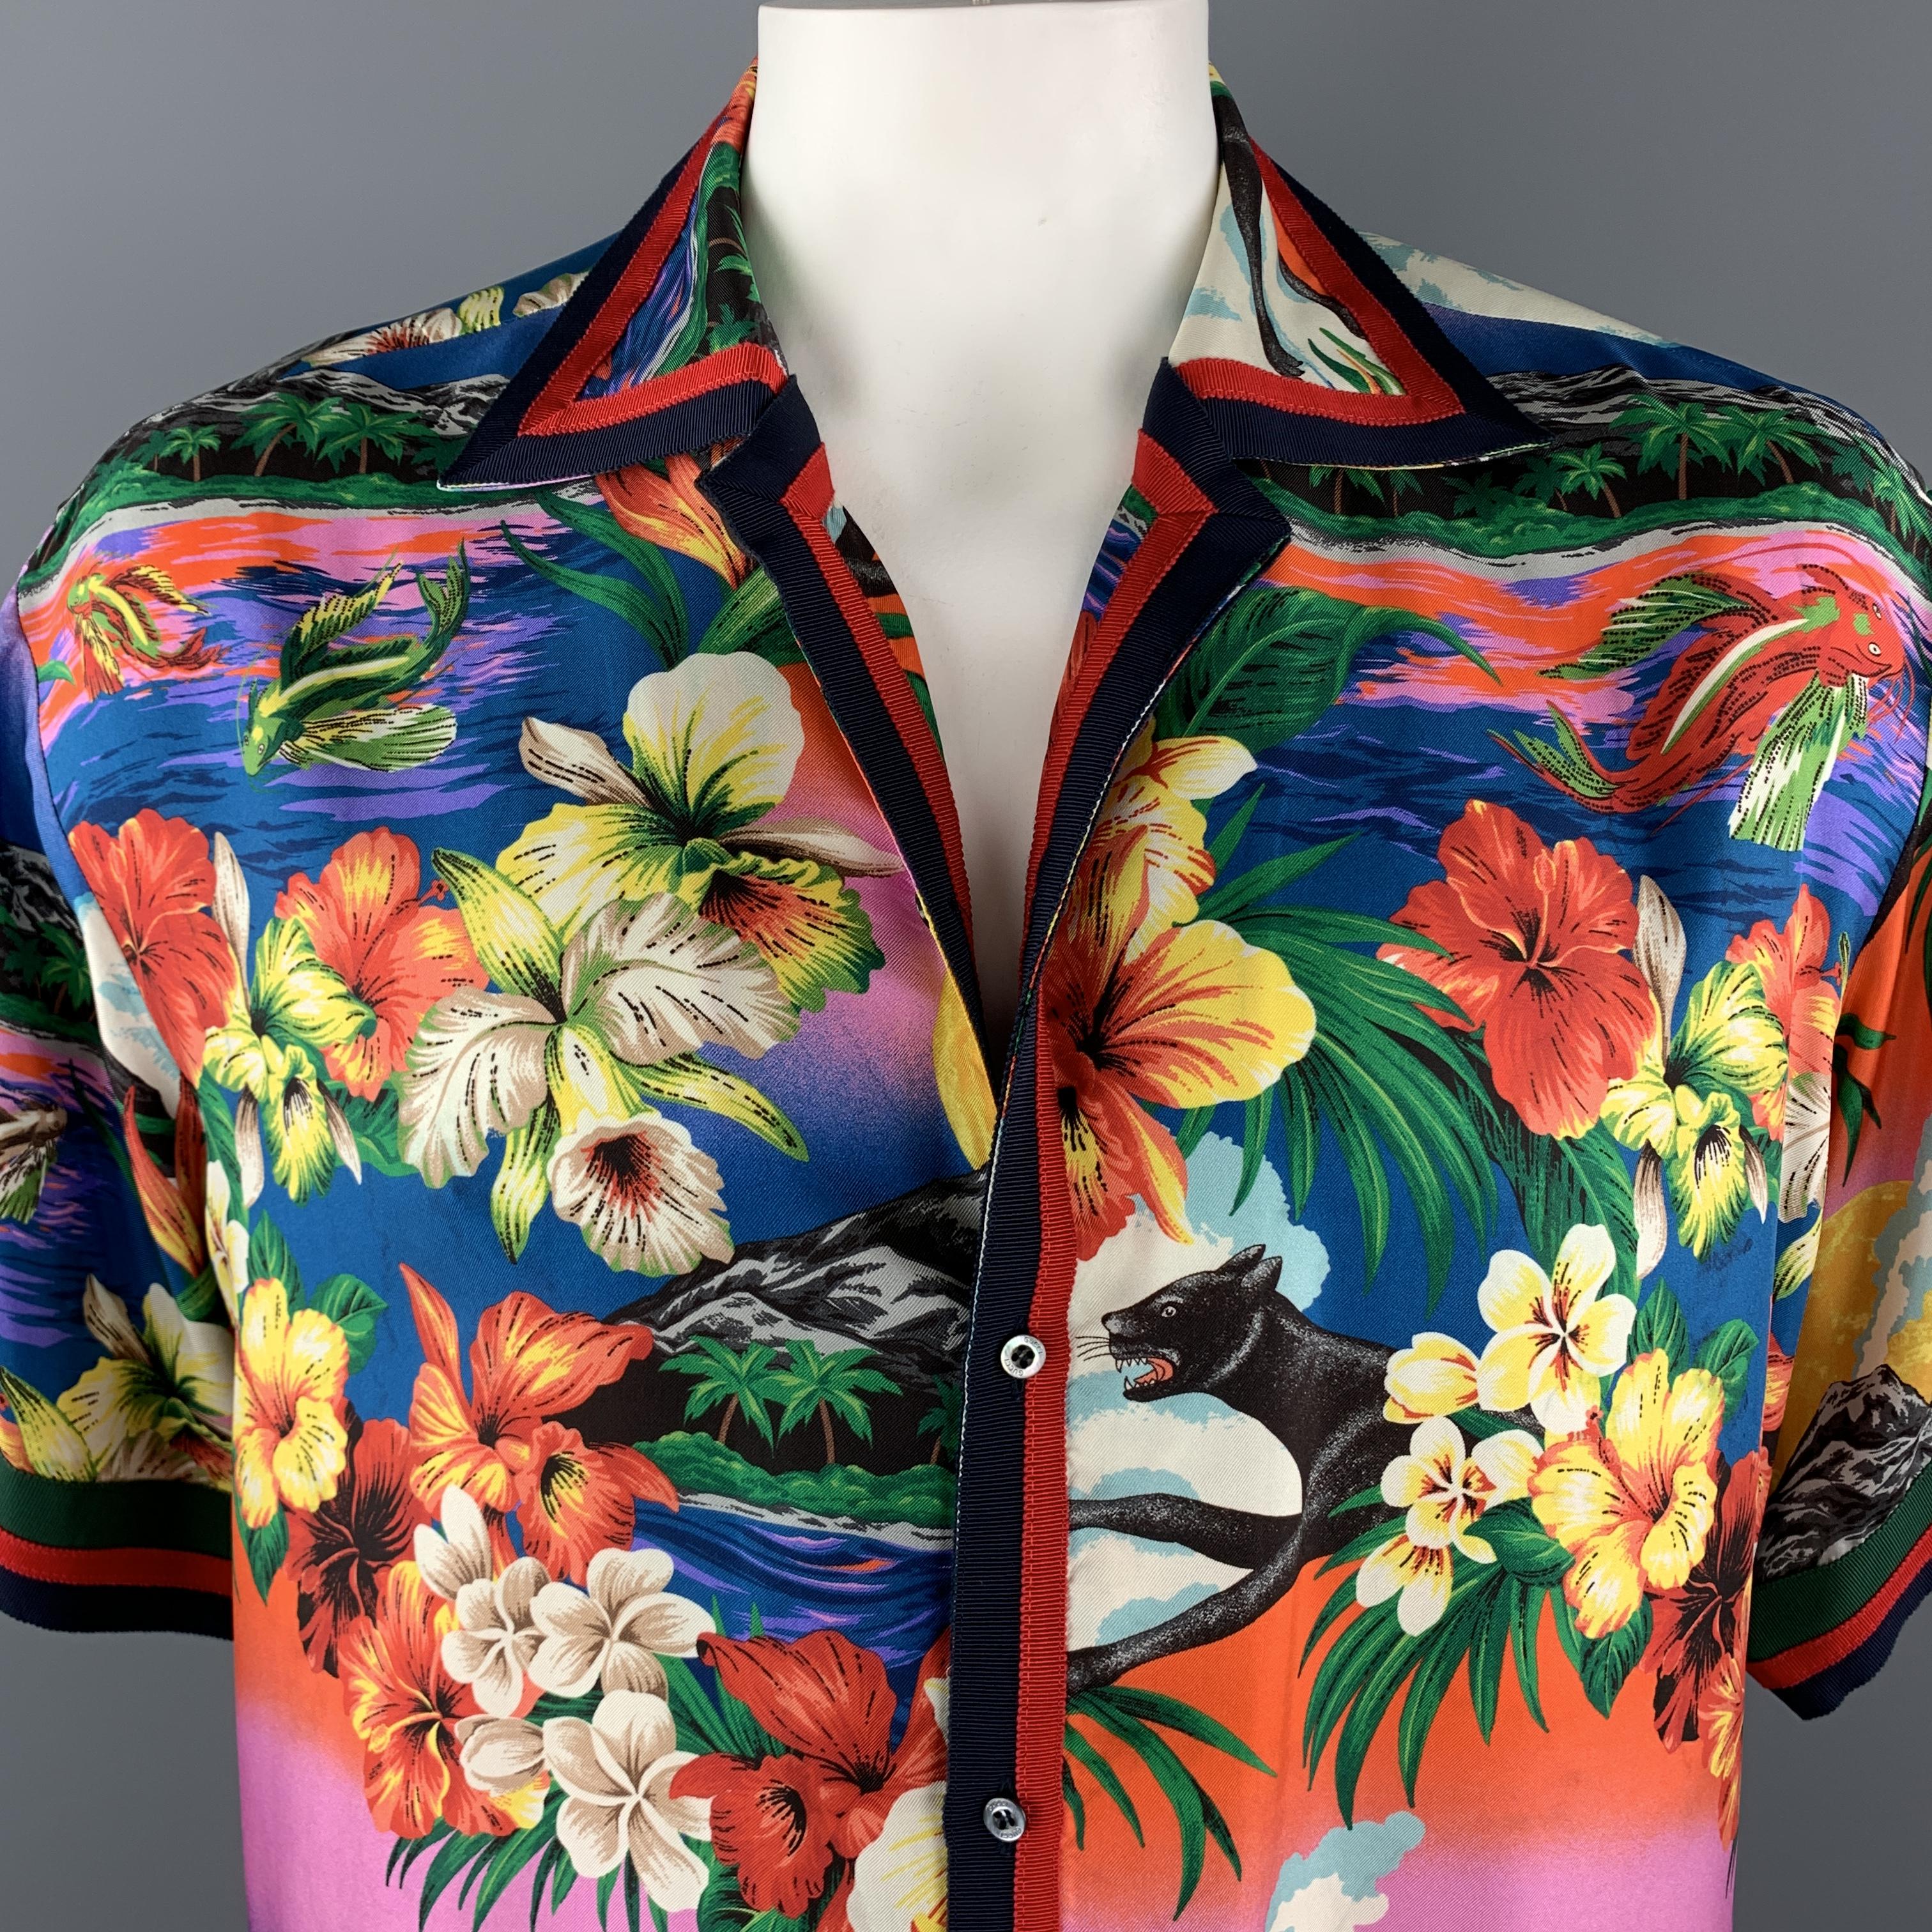 GUCCI Hawaiian resort shirt comes in a colorful silk twill with an all over floral, volcano, panther, and fish print , short sleeves, and red, navy, and green striped ribbon trim. Faint discolorations throughout. As-is. Matching shorts sold